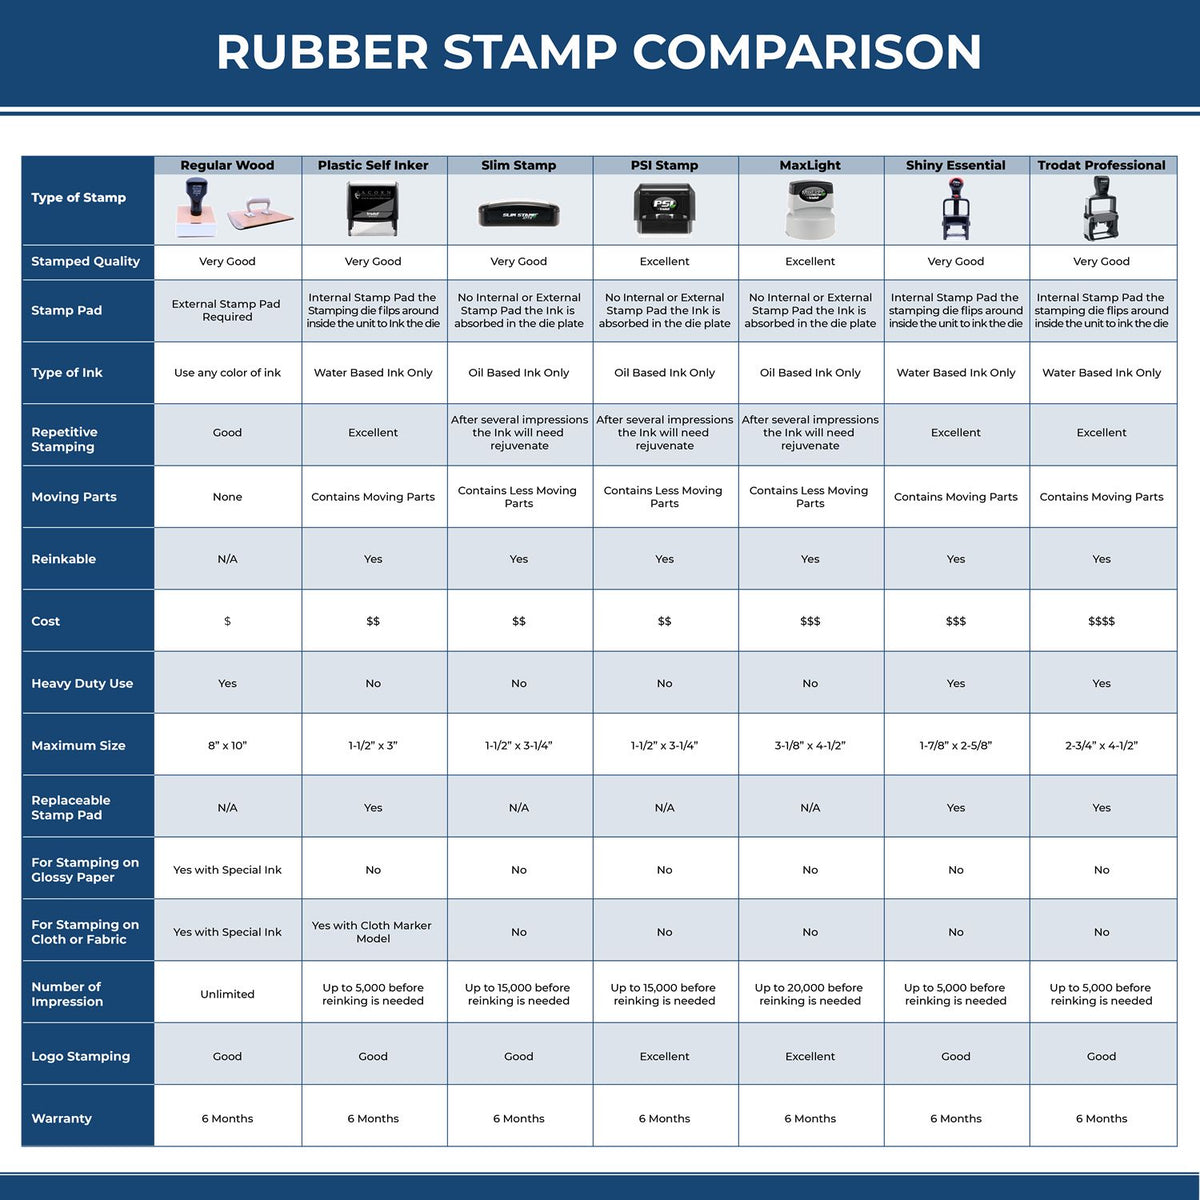 Large Preliminary As Built Rubber Stamp 4145R Rubber Stamp Comparison